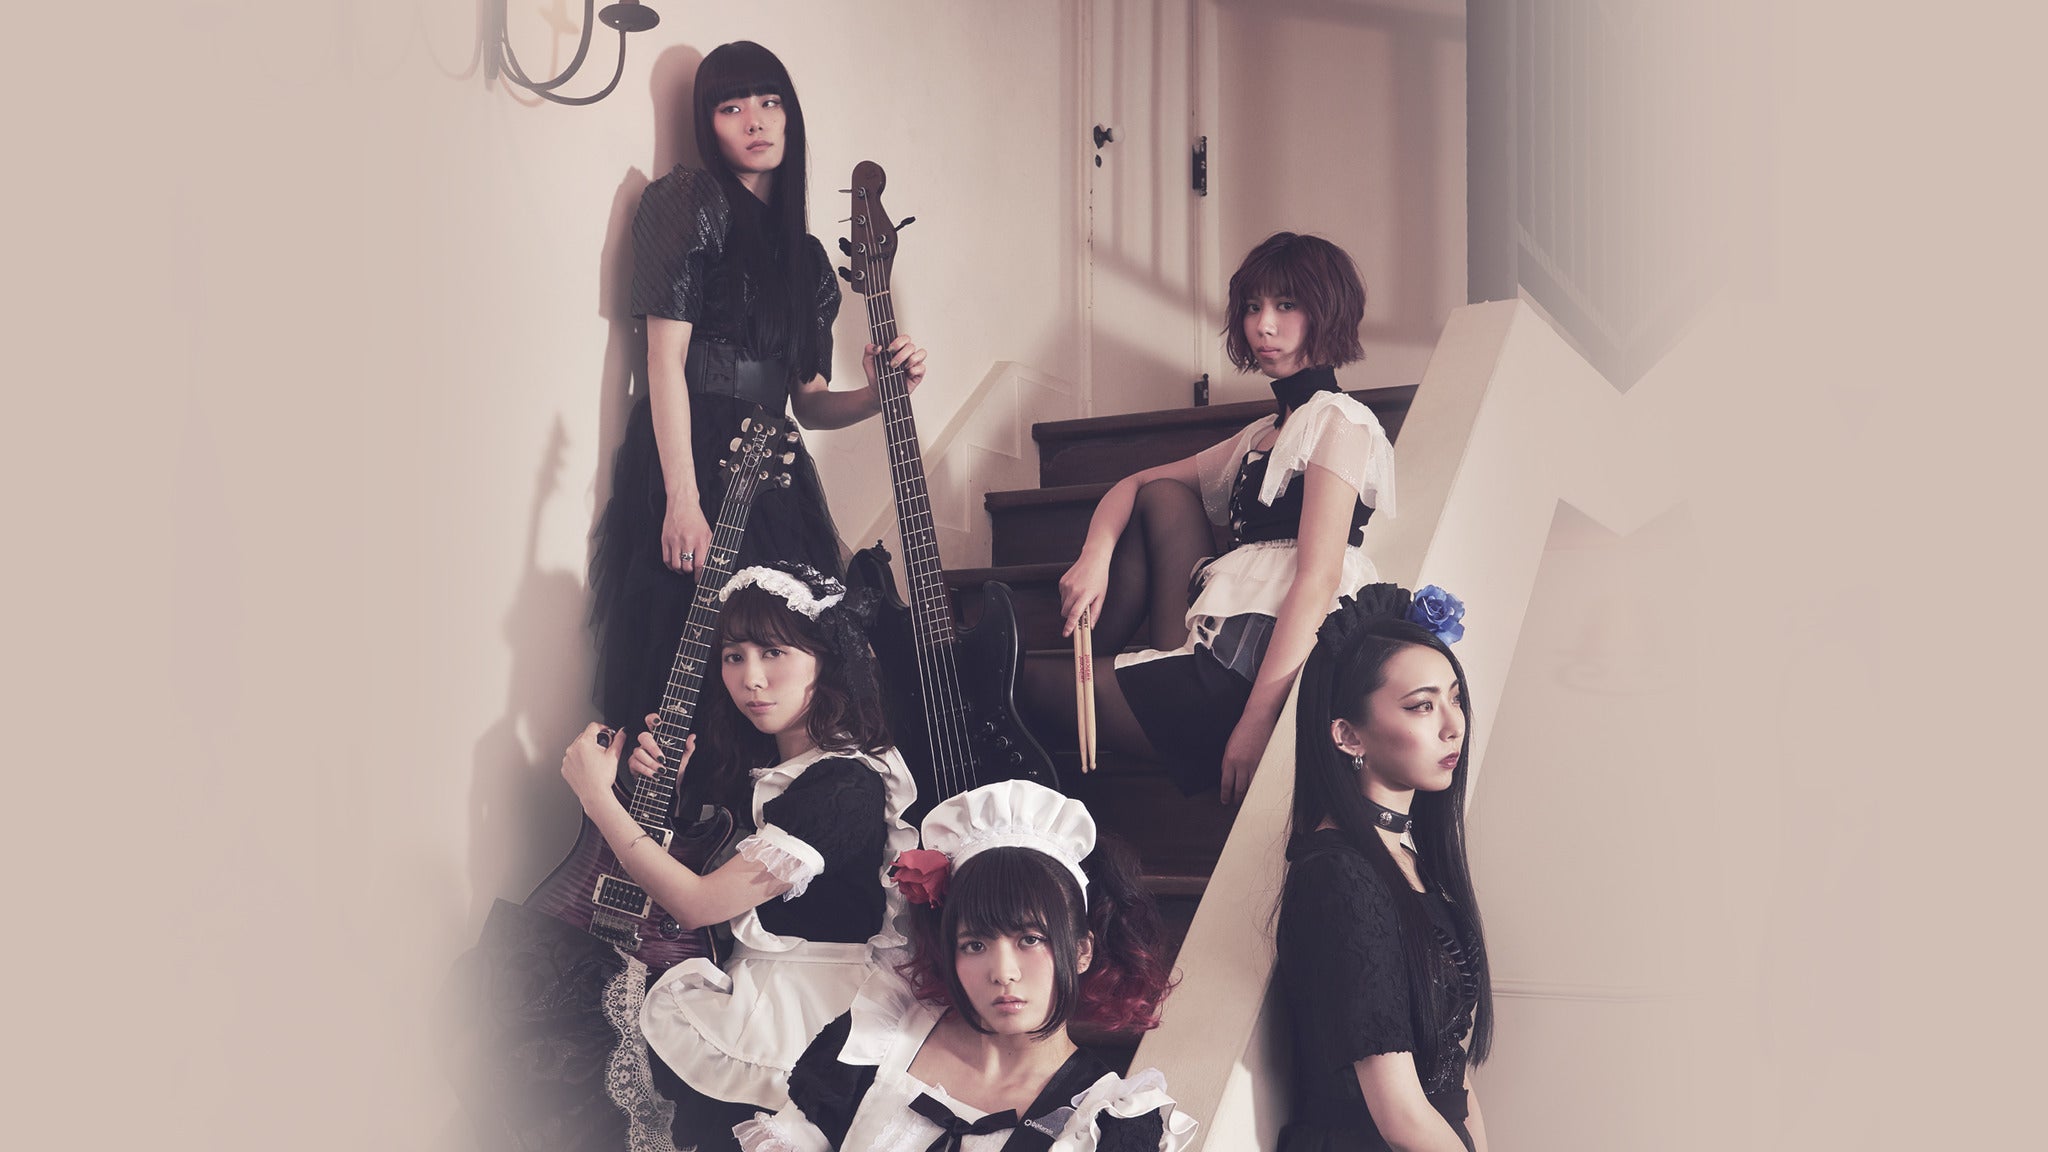 BAND-MAID WORLD DOMINATION TOUR 2019 ~gekidou~ in New York promo photo for VIP presale offer code